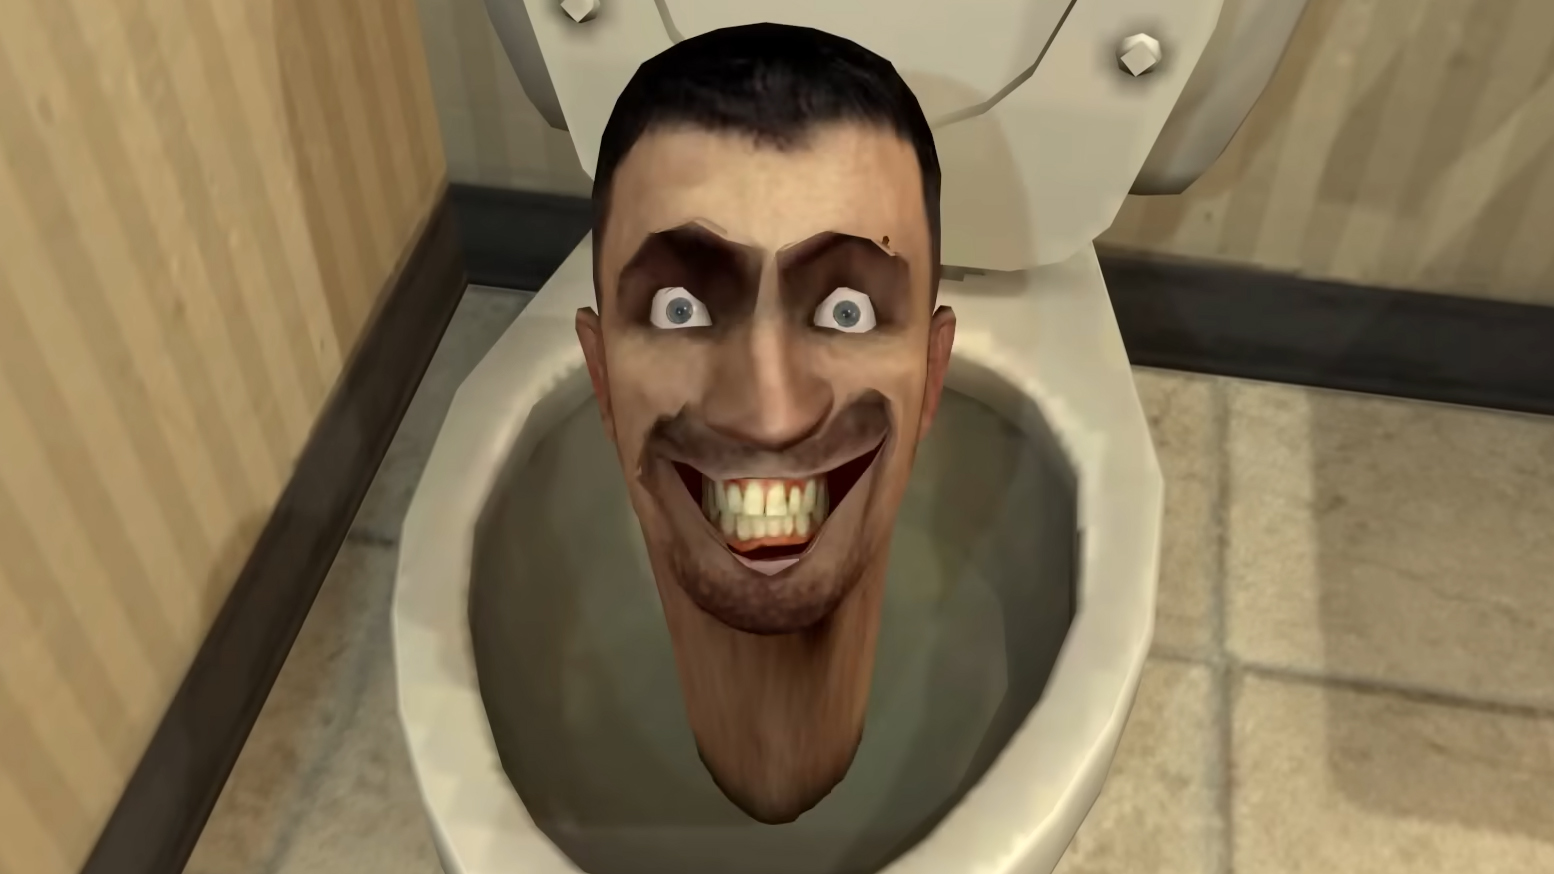  Mystery afoot as Garry's Mod gets hit by Skibi-DMCA apparently on behalf of Michael Bay's Skibidi Toilet film studio: 'Can you believe the cheek?' 